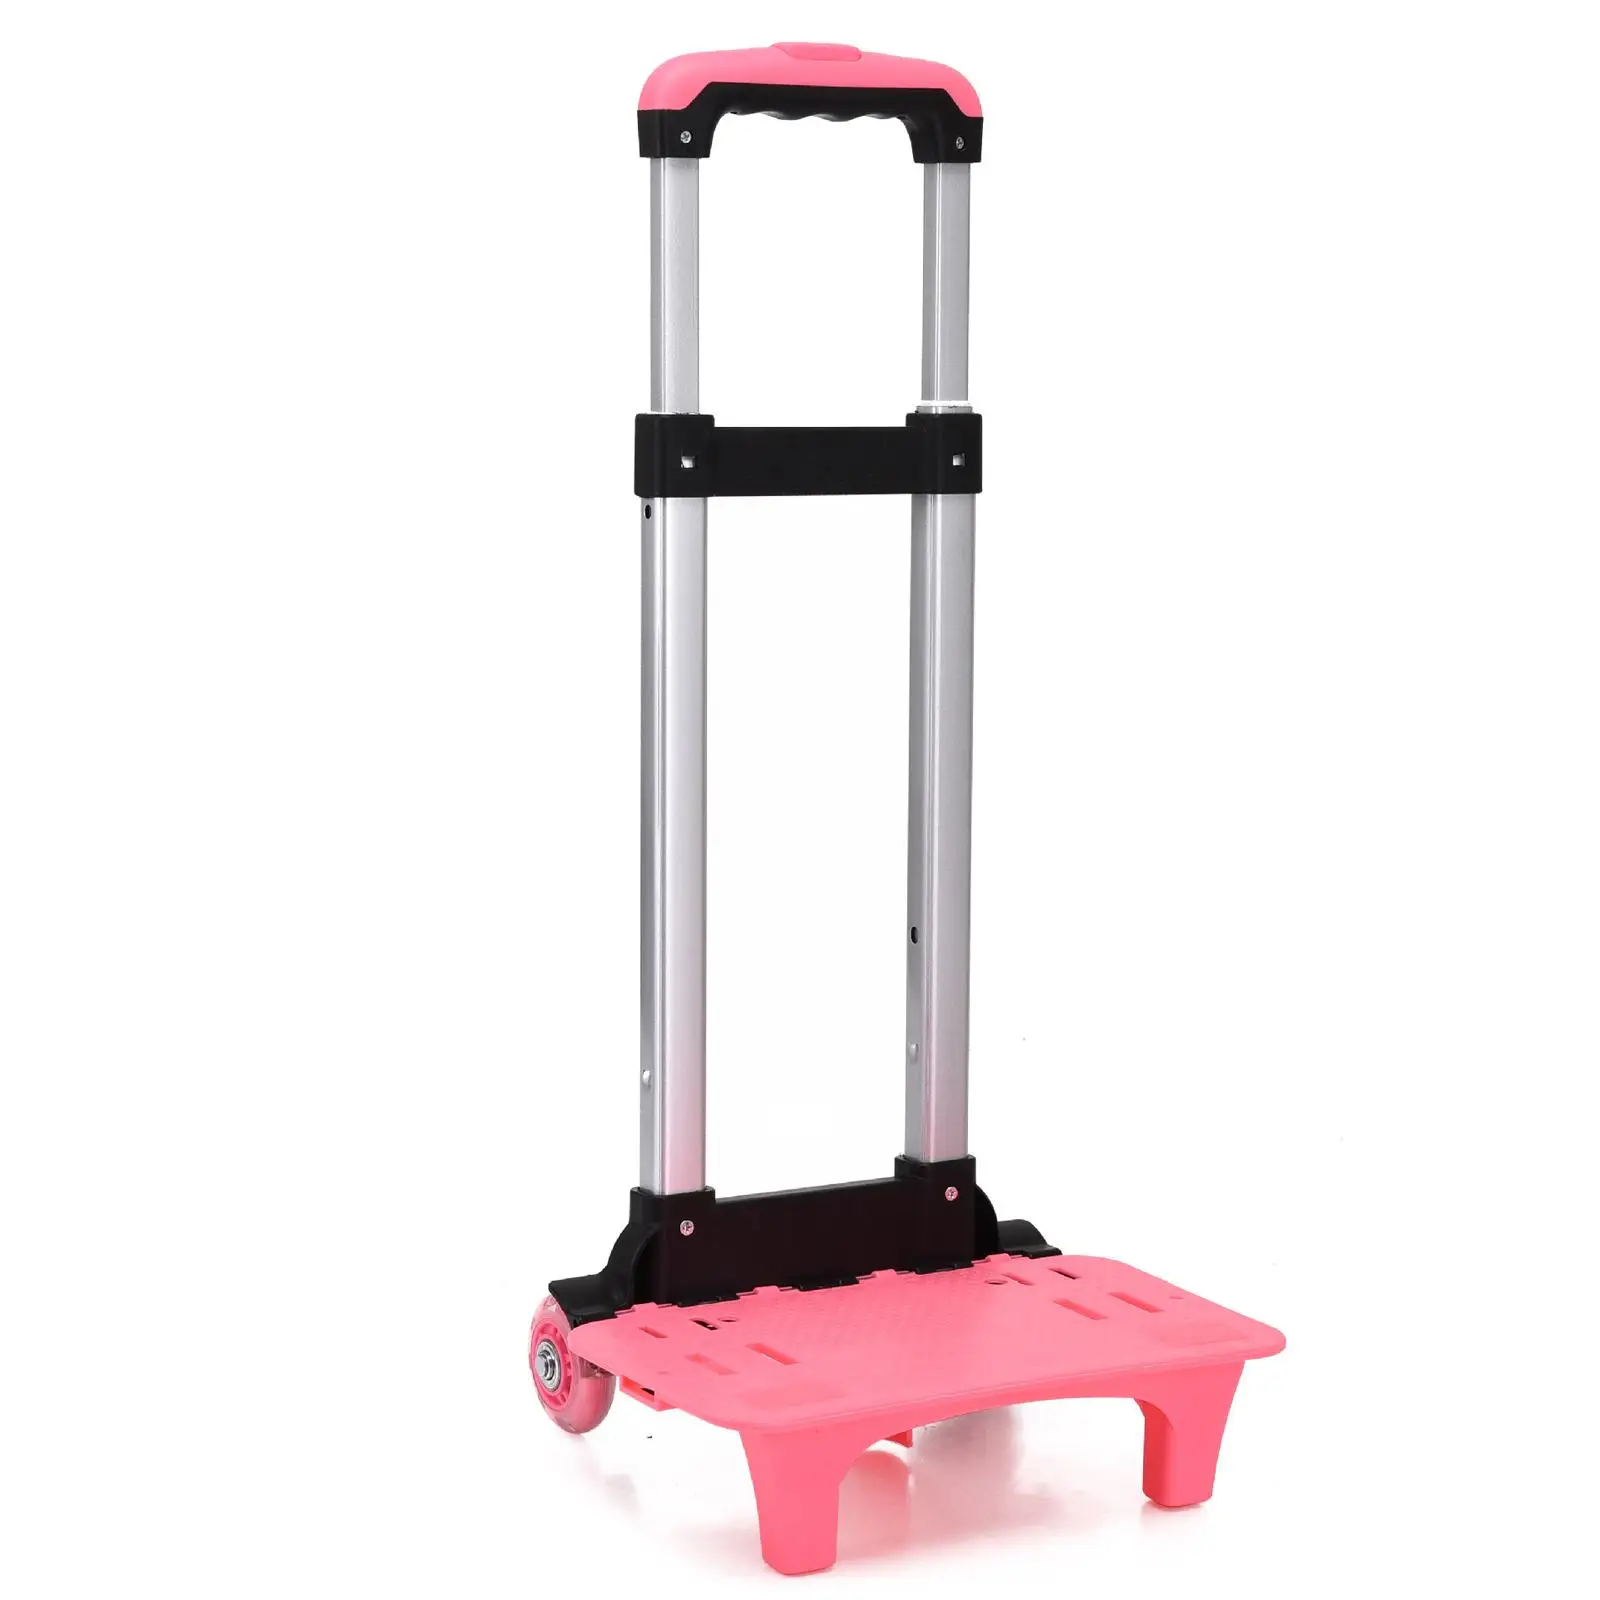 Backpack Trolley Telescopic Rod Portable Collapsible 2 Wheels Pink Backpack Hand Truck Hand Cart Wheeled Cart for Kids Children